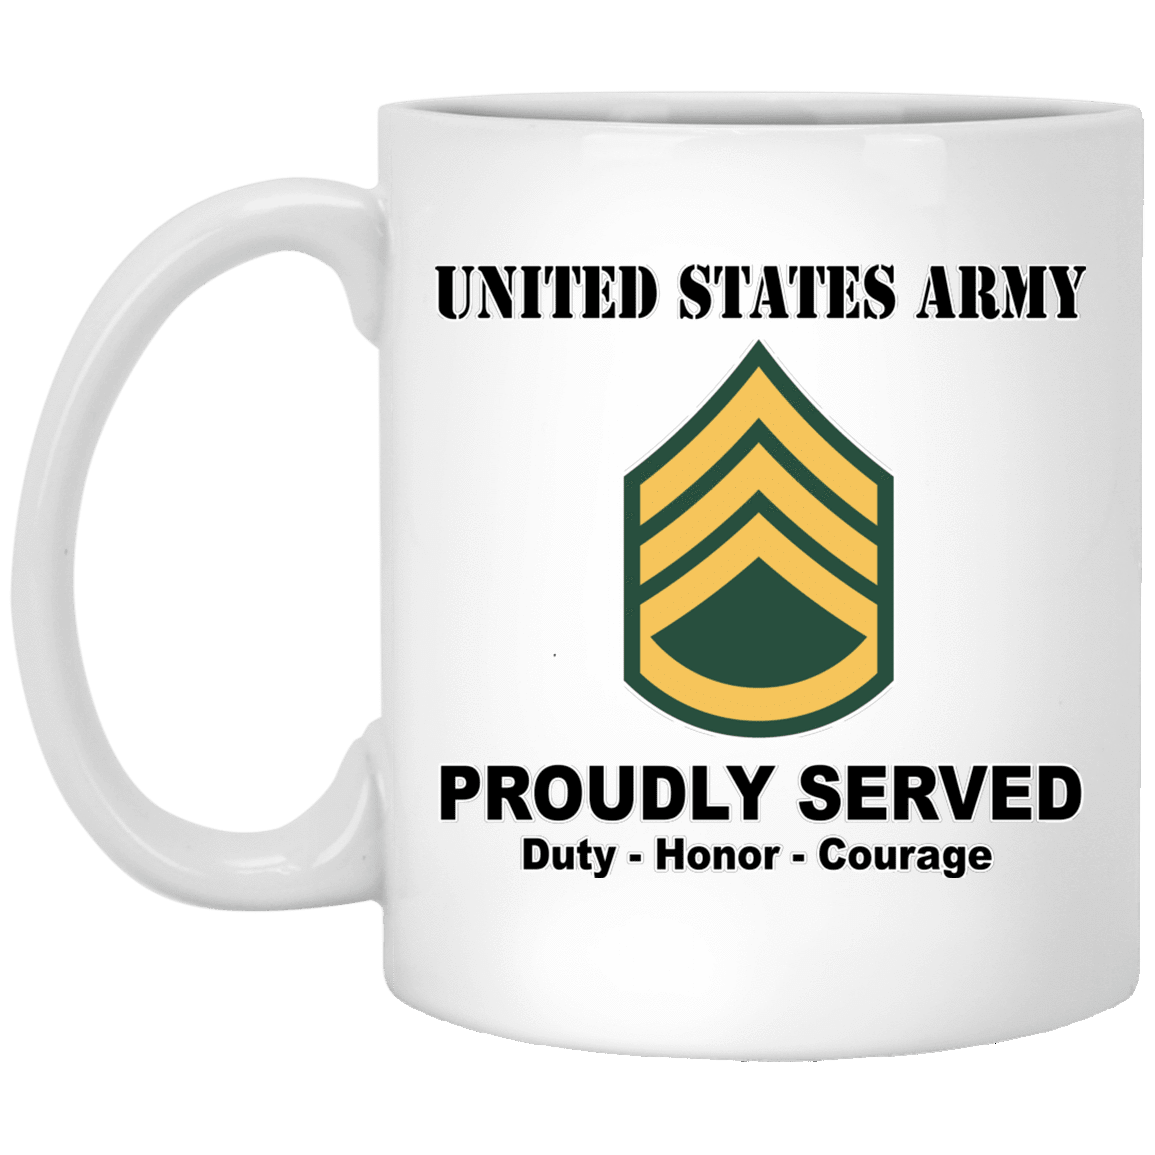 US Army Insignia Proudly Served Duty - Honor - Courage White Coffee Mug 11oz-Mug-Army-Veterans Nation